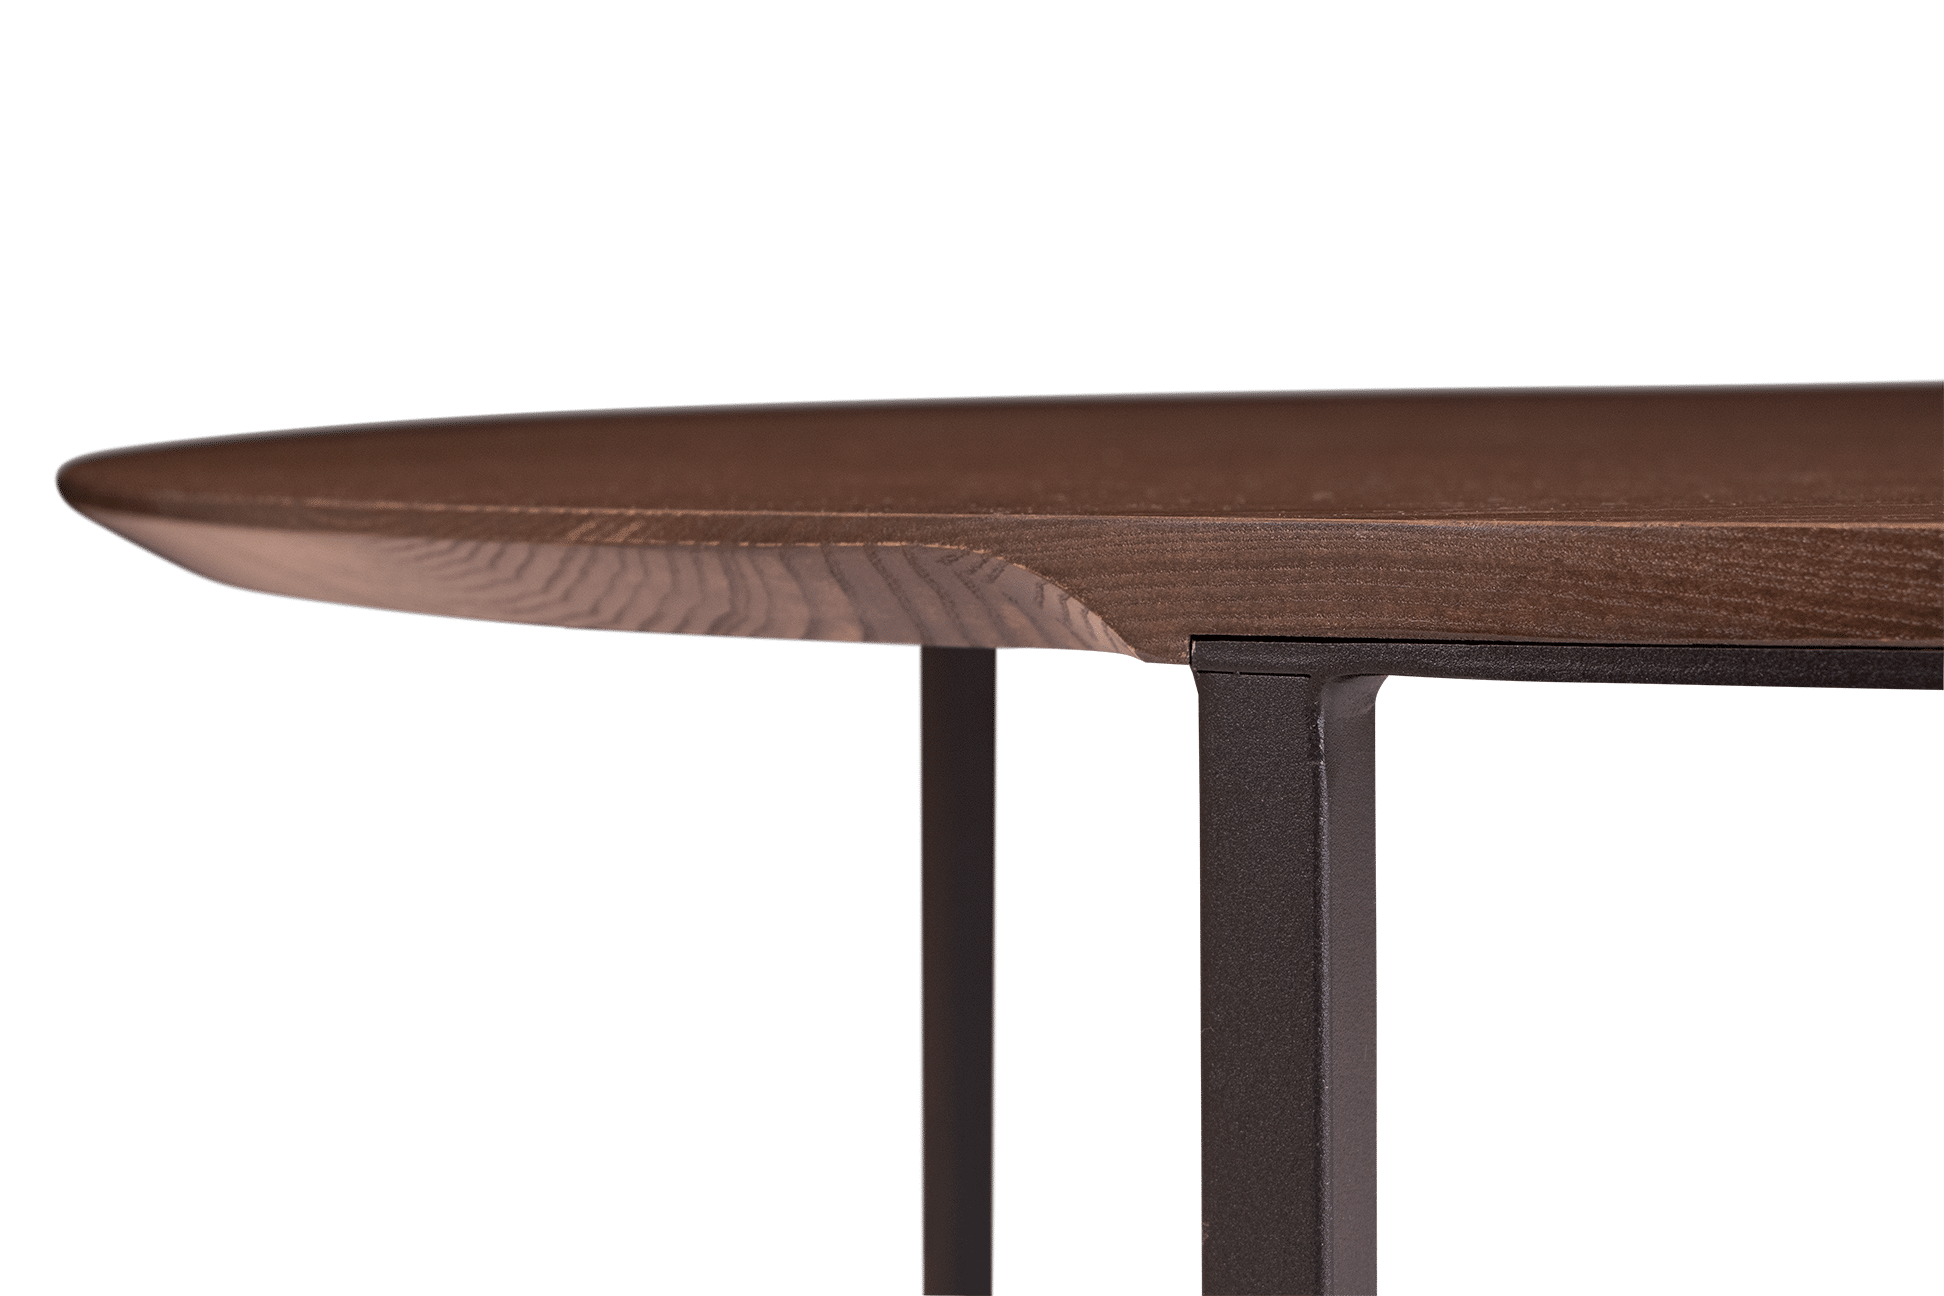 Halo Occasional - An elegant cantilever table design.